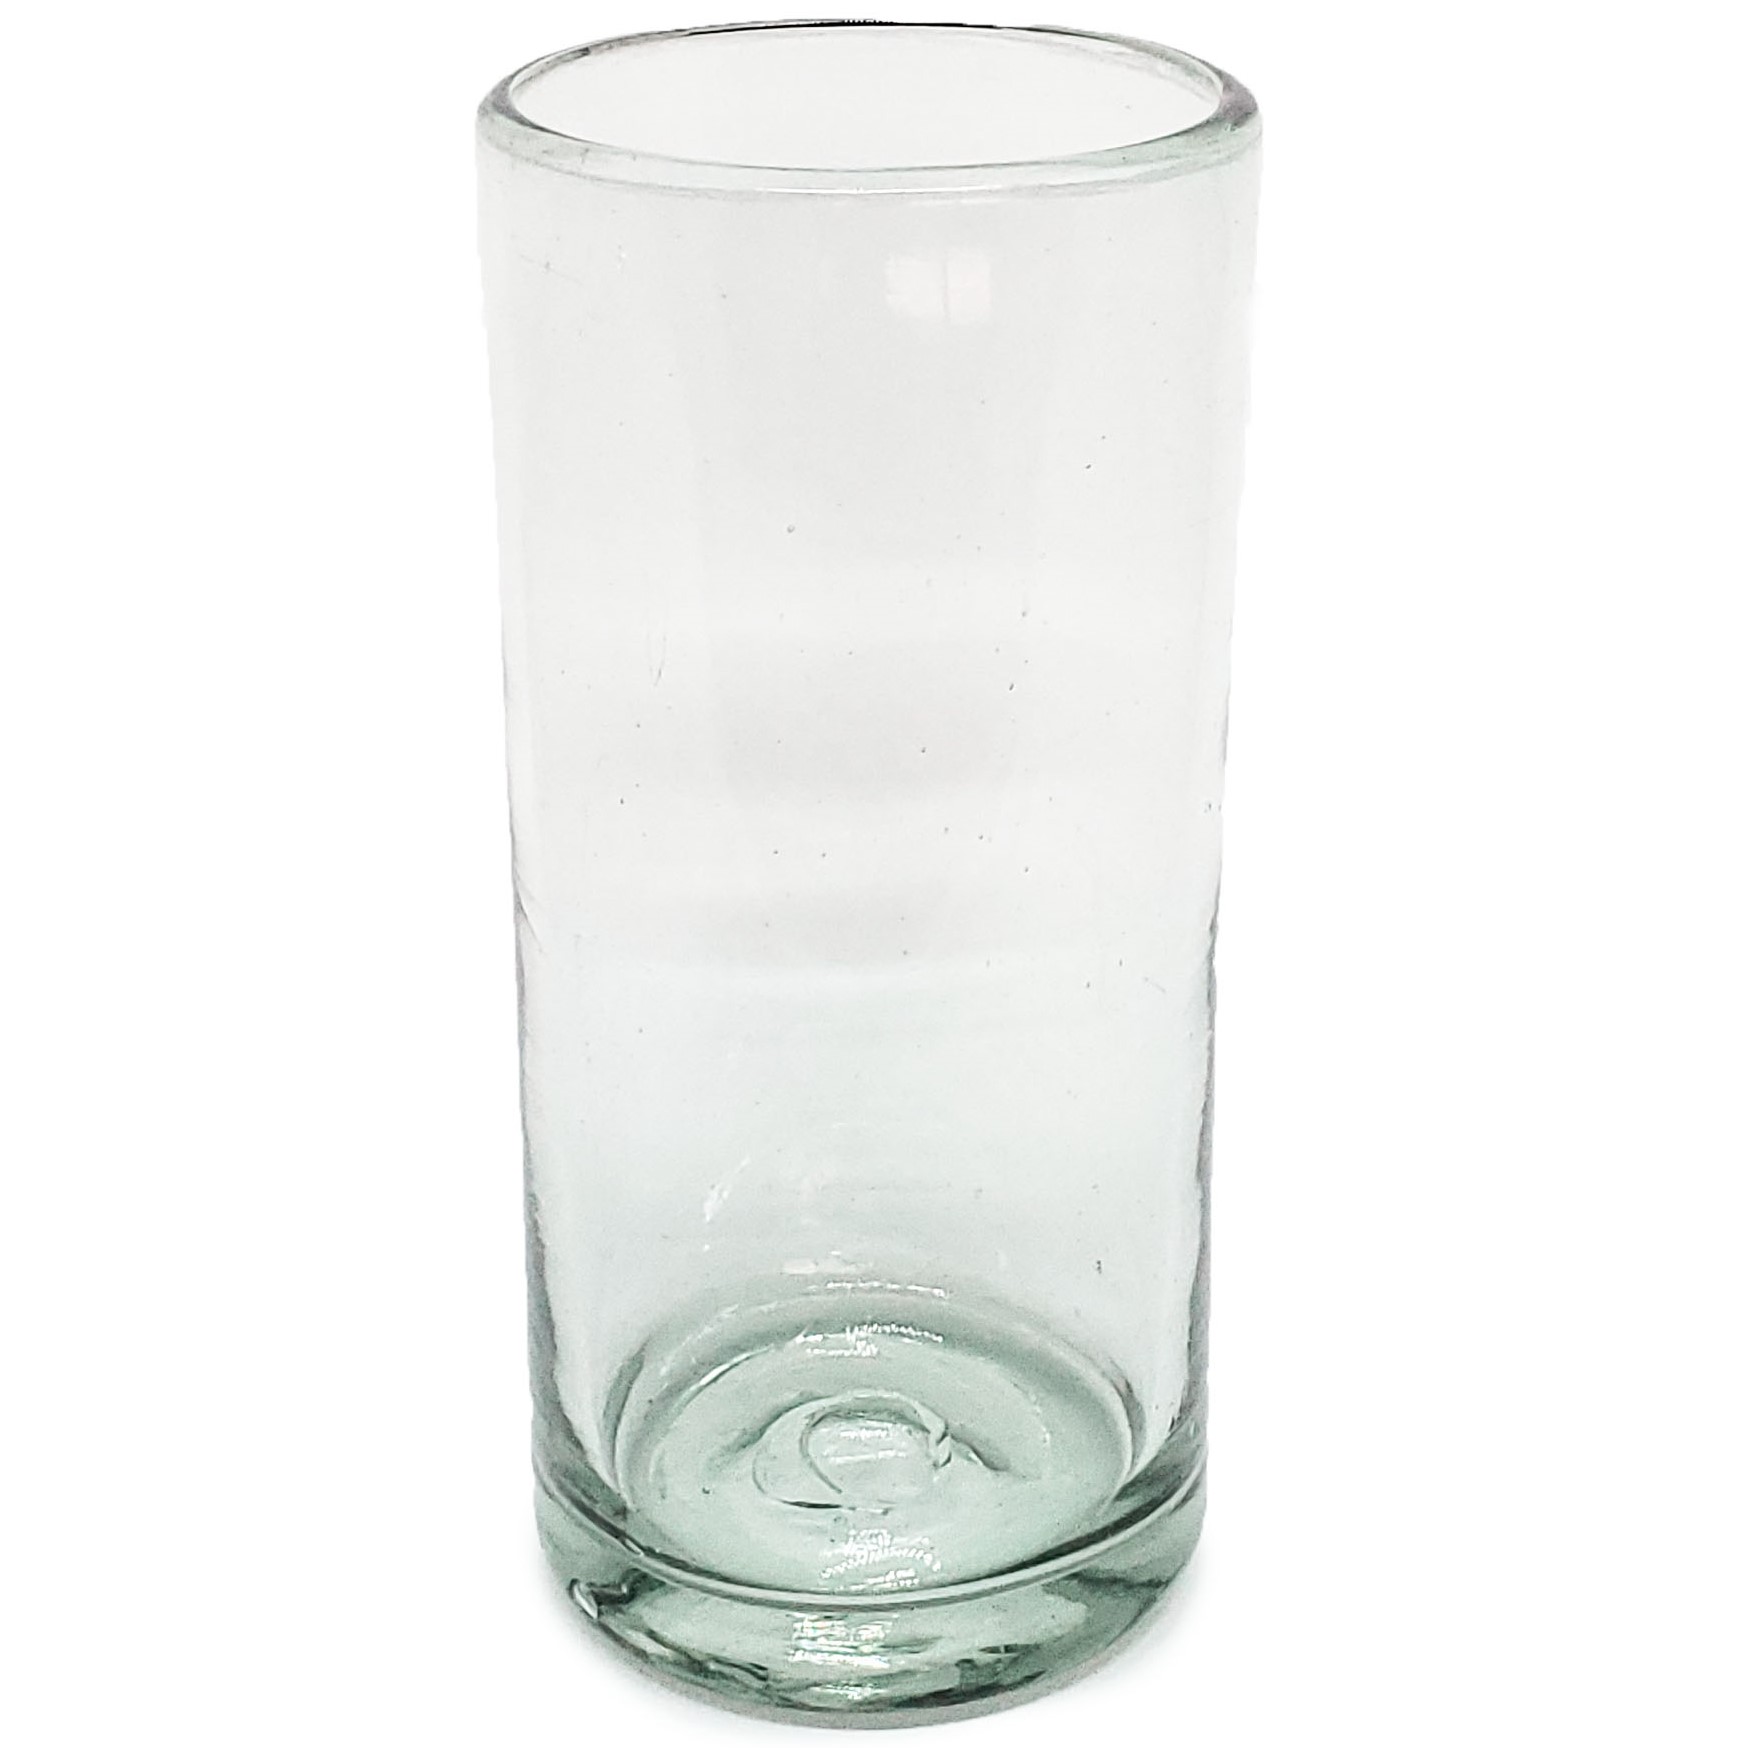 https://mexhandcraft.com/imgProducts/Clear%2020%20oz%20Tall%20Iced%20Tea%20Glasses%20(set%20of%206)%20(7).jpg